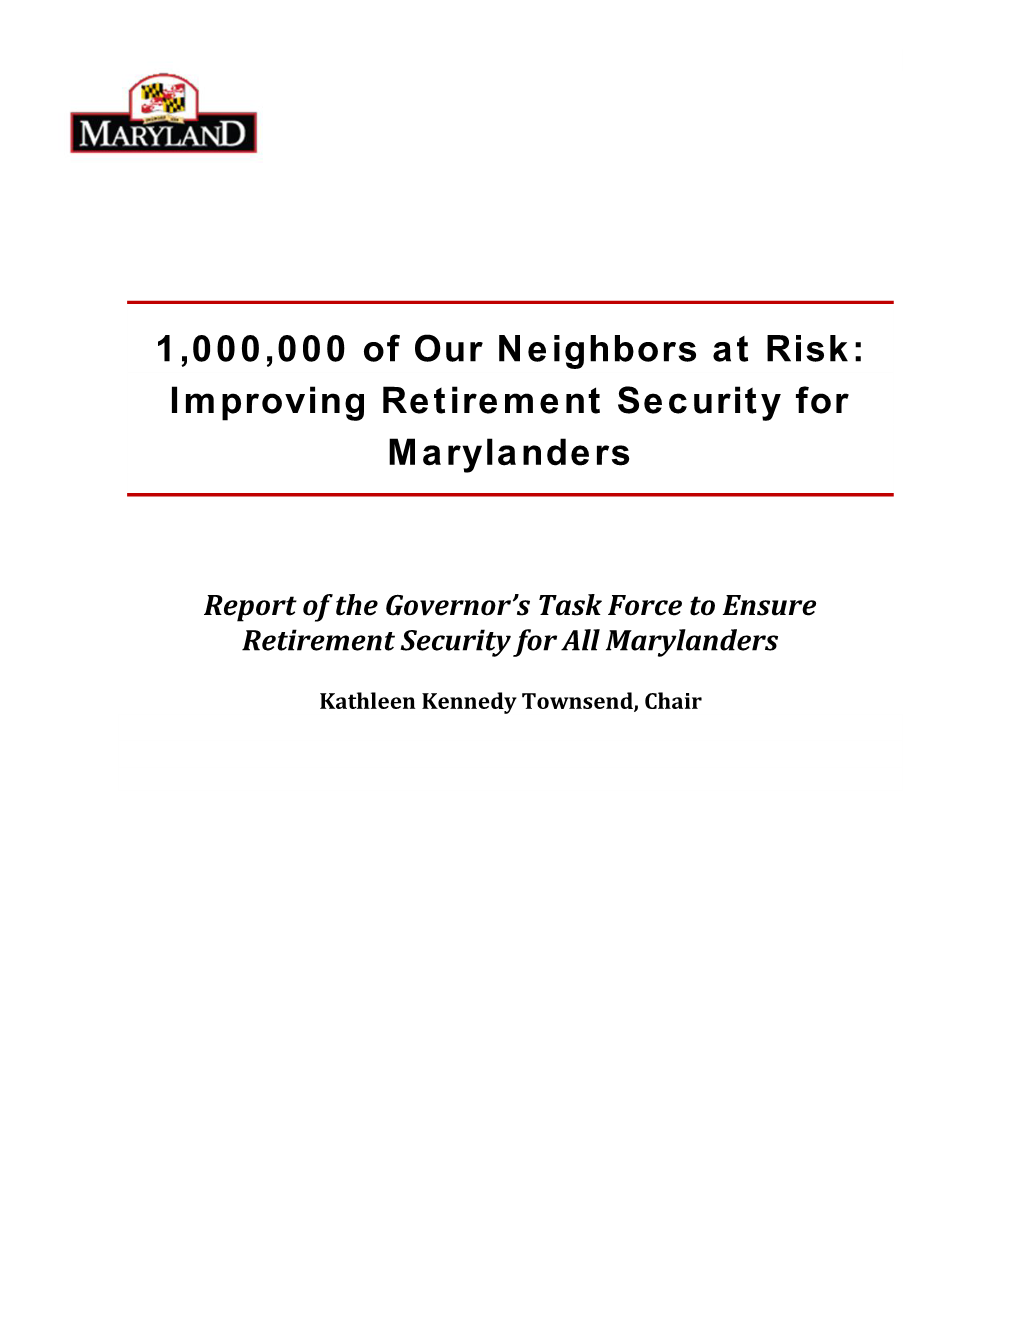 Improving Retirement Security for Marylanders